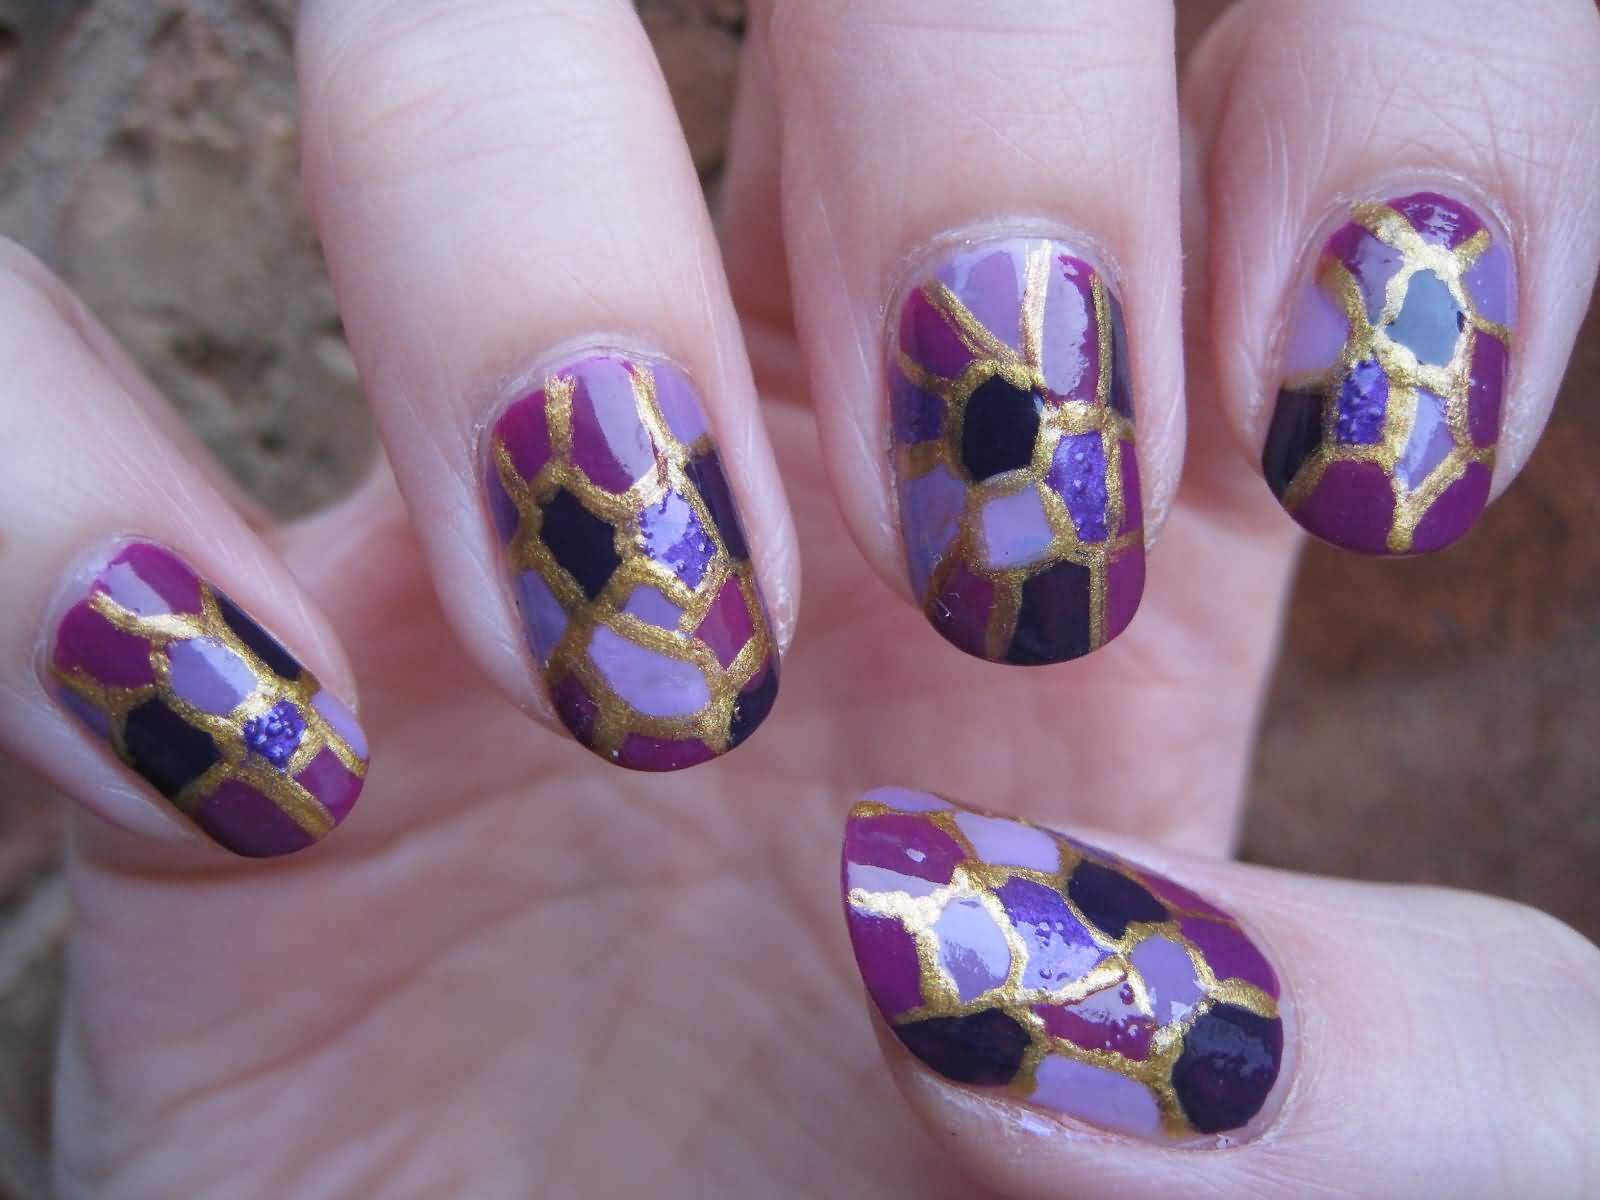 50+ Stiletto Nail Art Ideas That Will Make You Want to Try Them ASAP - wide 9